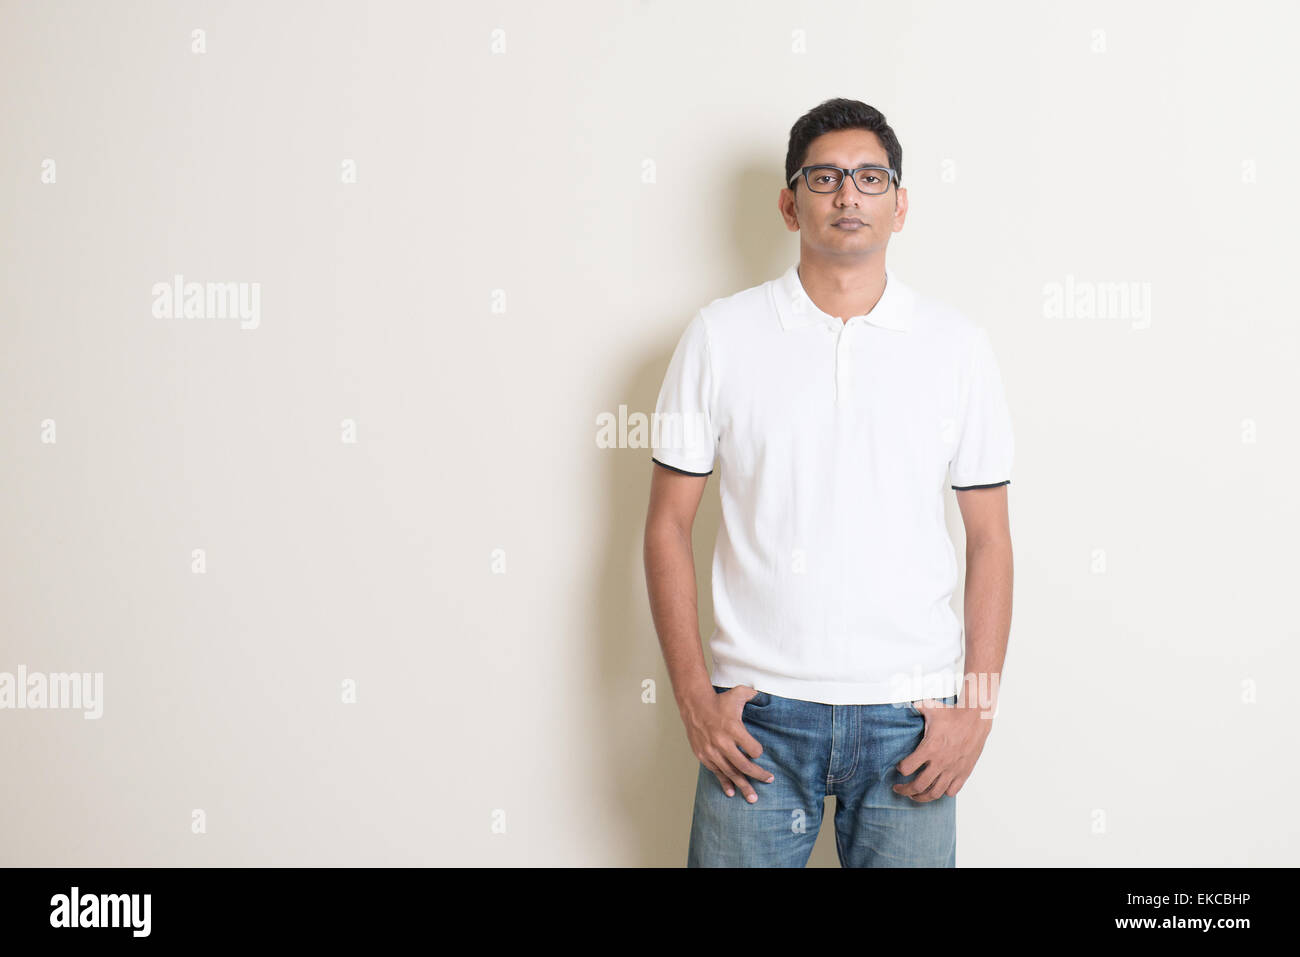 Portrait of cool Indian guy looking at camera, standing on plain background with shadow, copy space at side. Stock Photo